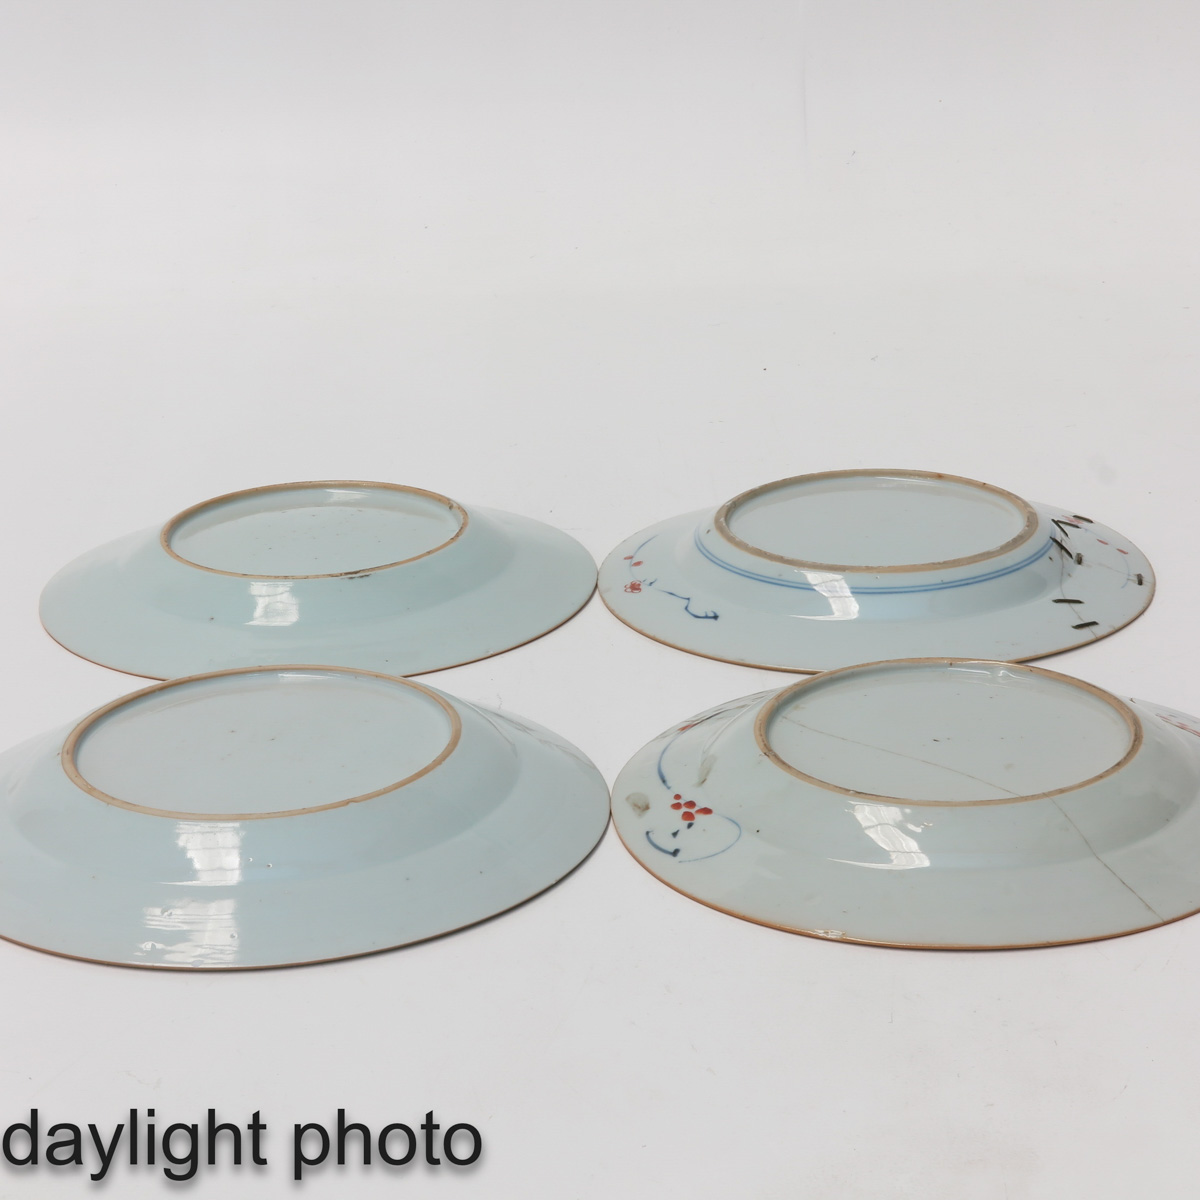 A Collection of 6 Imari Plates - Image 10 of 10